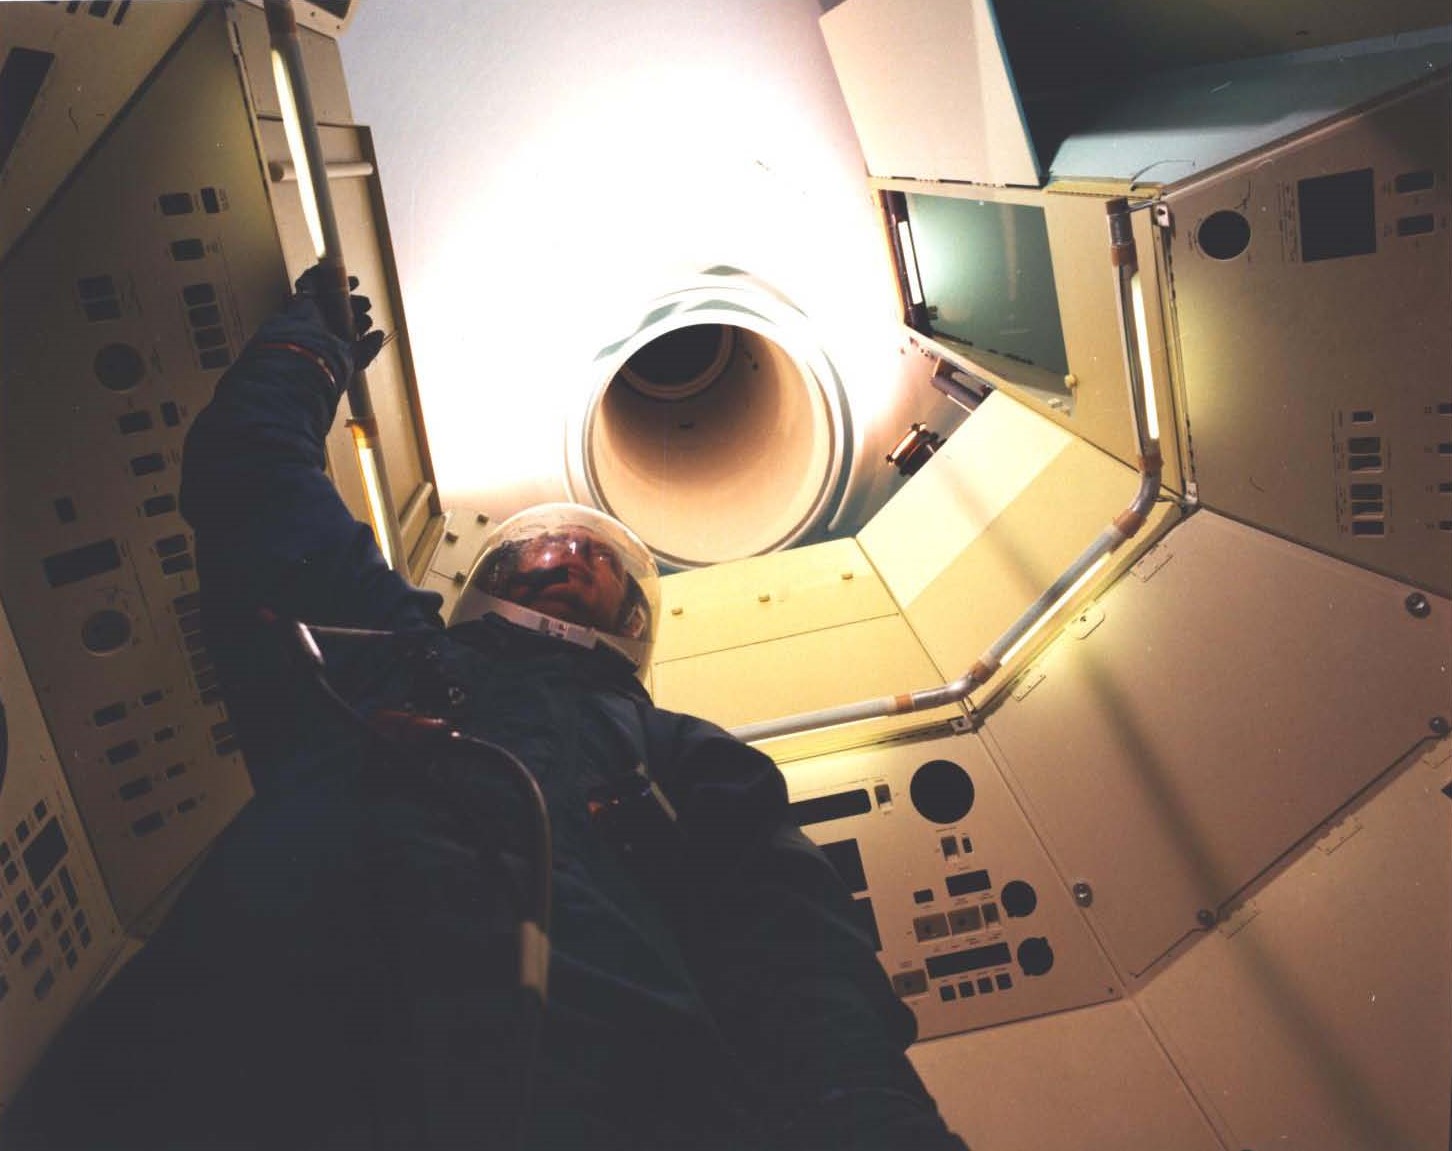 Medium fidelity mockup of the MOL crew cabin, with suited crew member and the narrow tunnel leading to the Gemini-B capsule